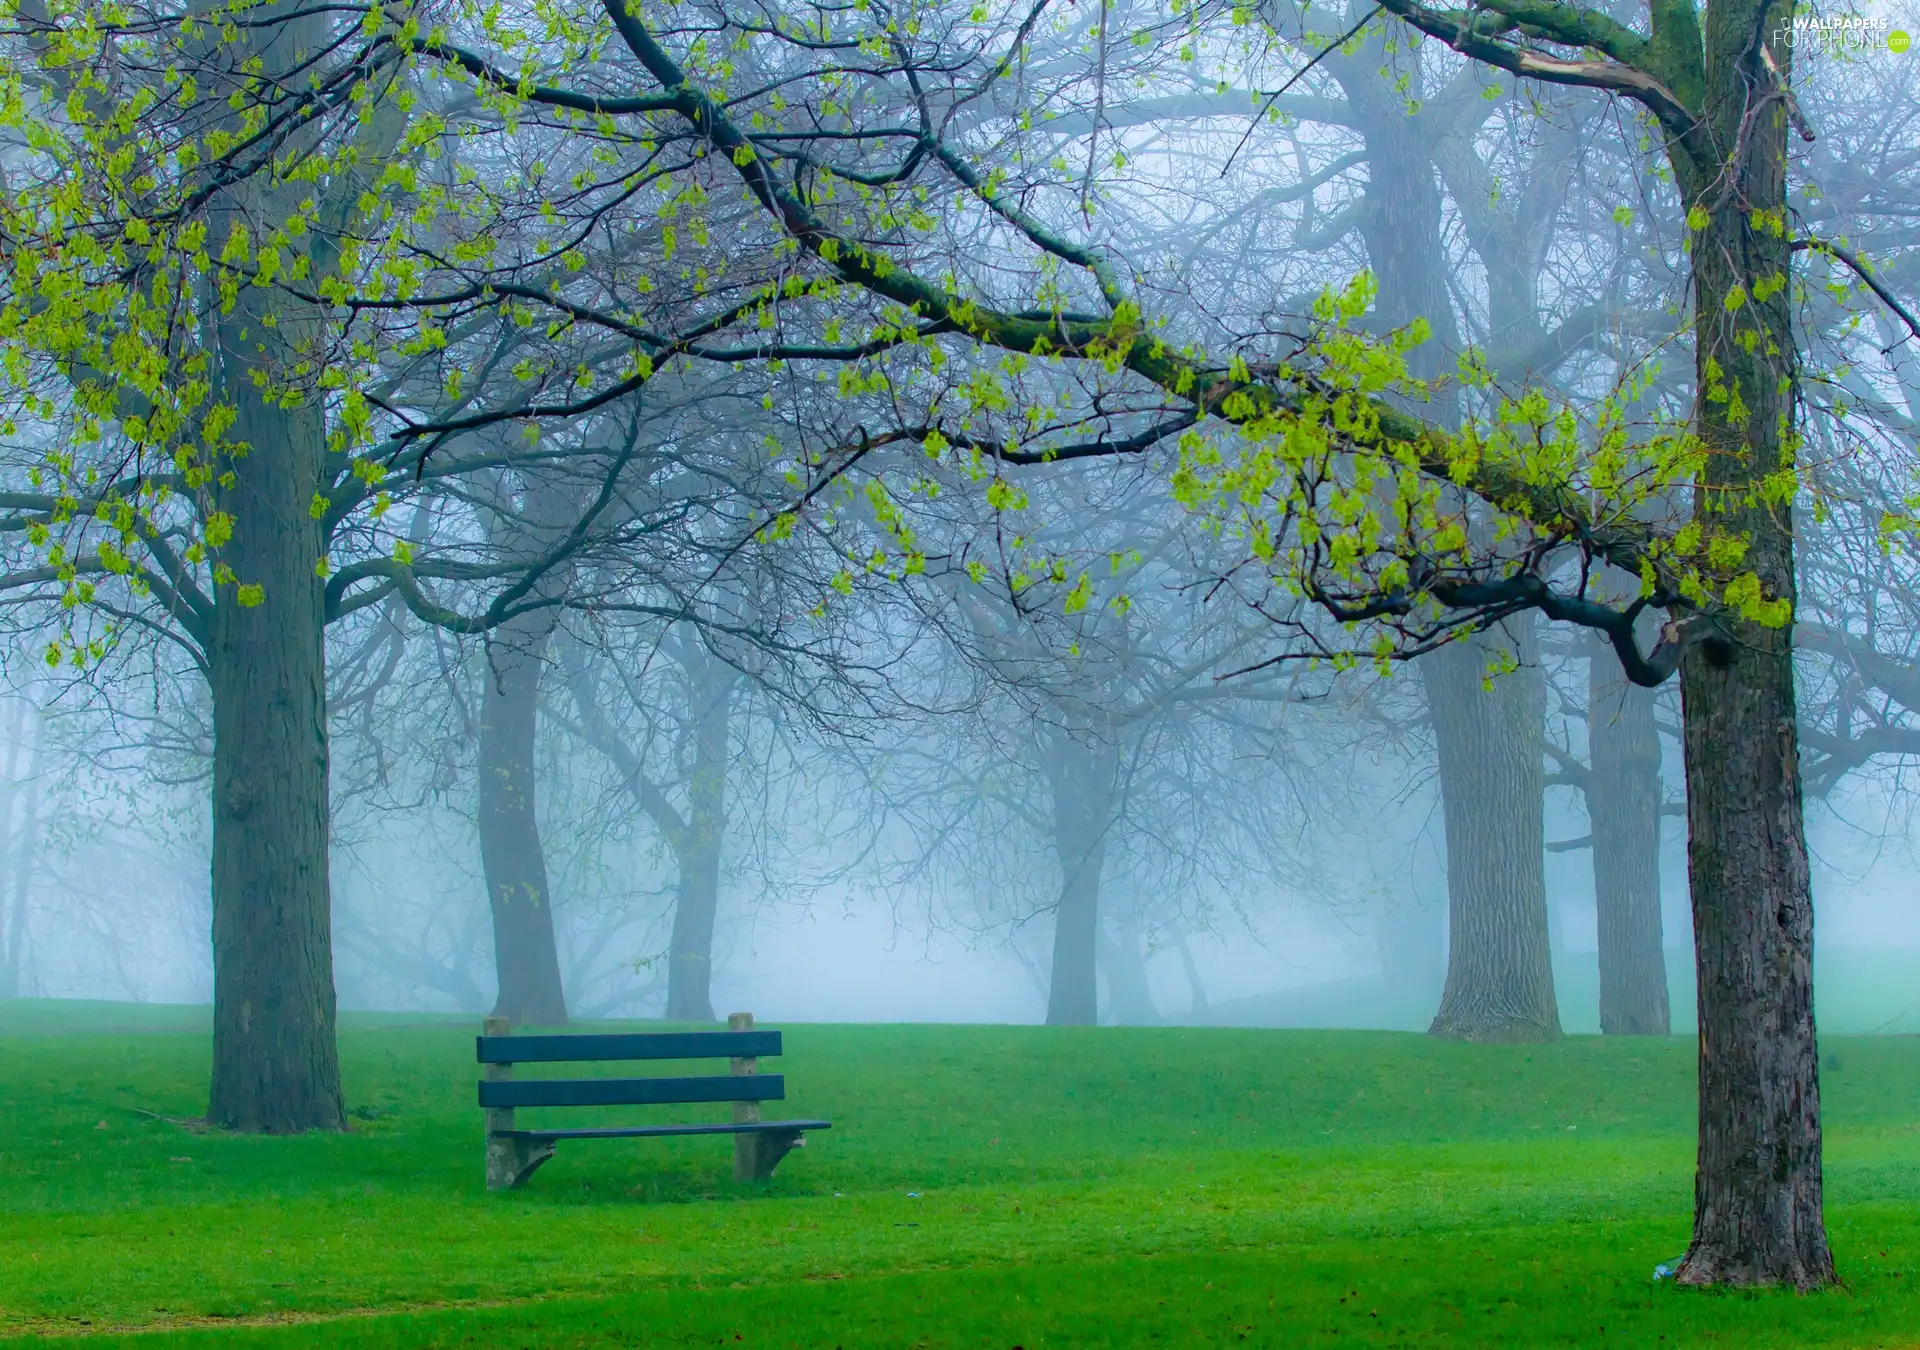 Bench, Fog, trees, viewes, Park